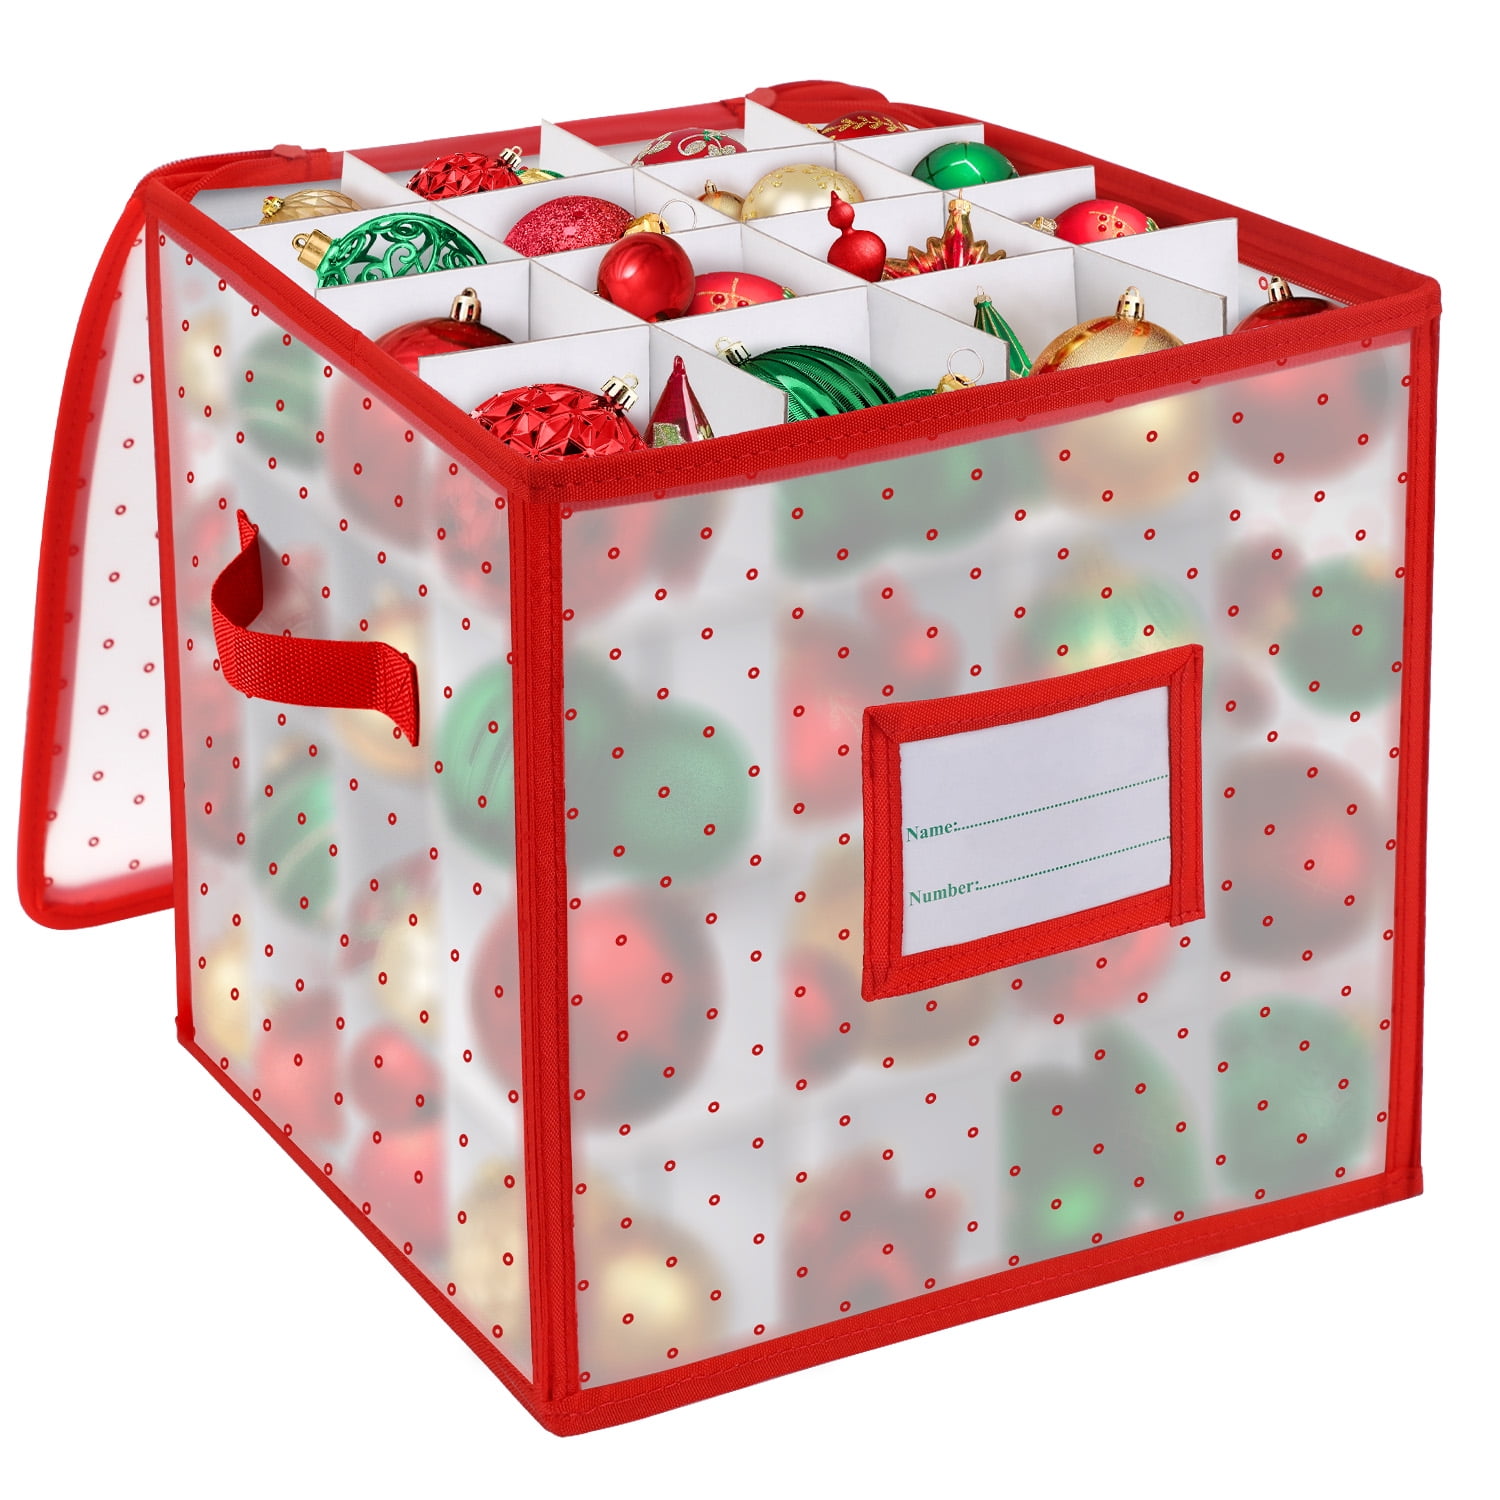 Simplify 27 Count Stackable Christmas Ornament Storage Box - Red